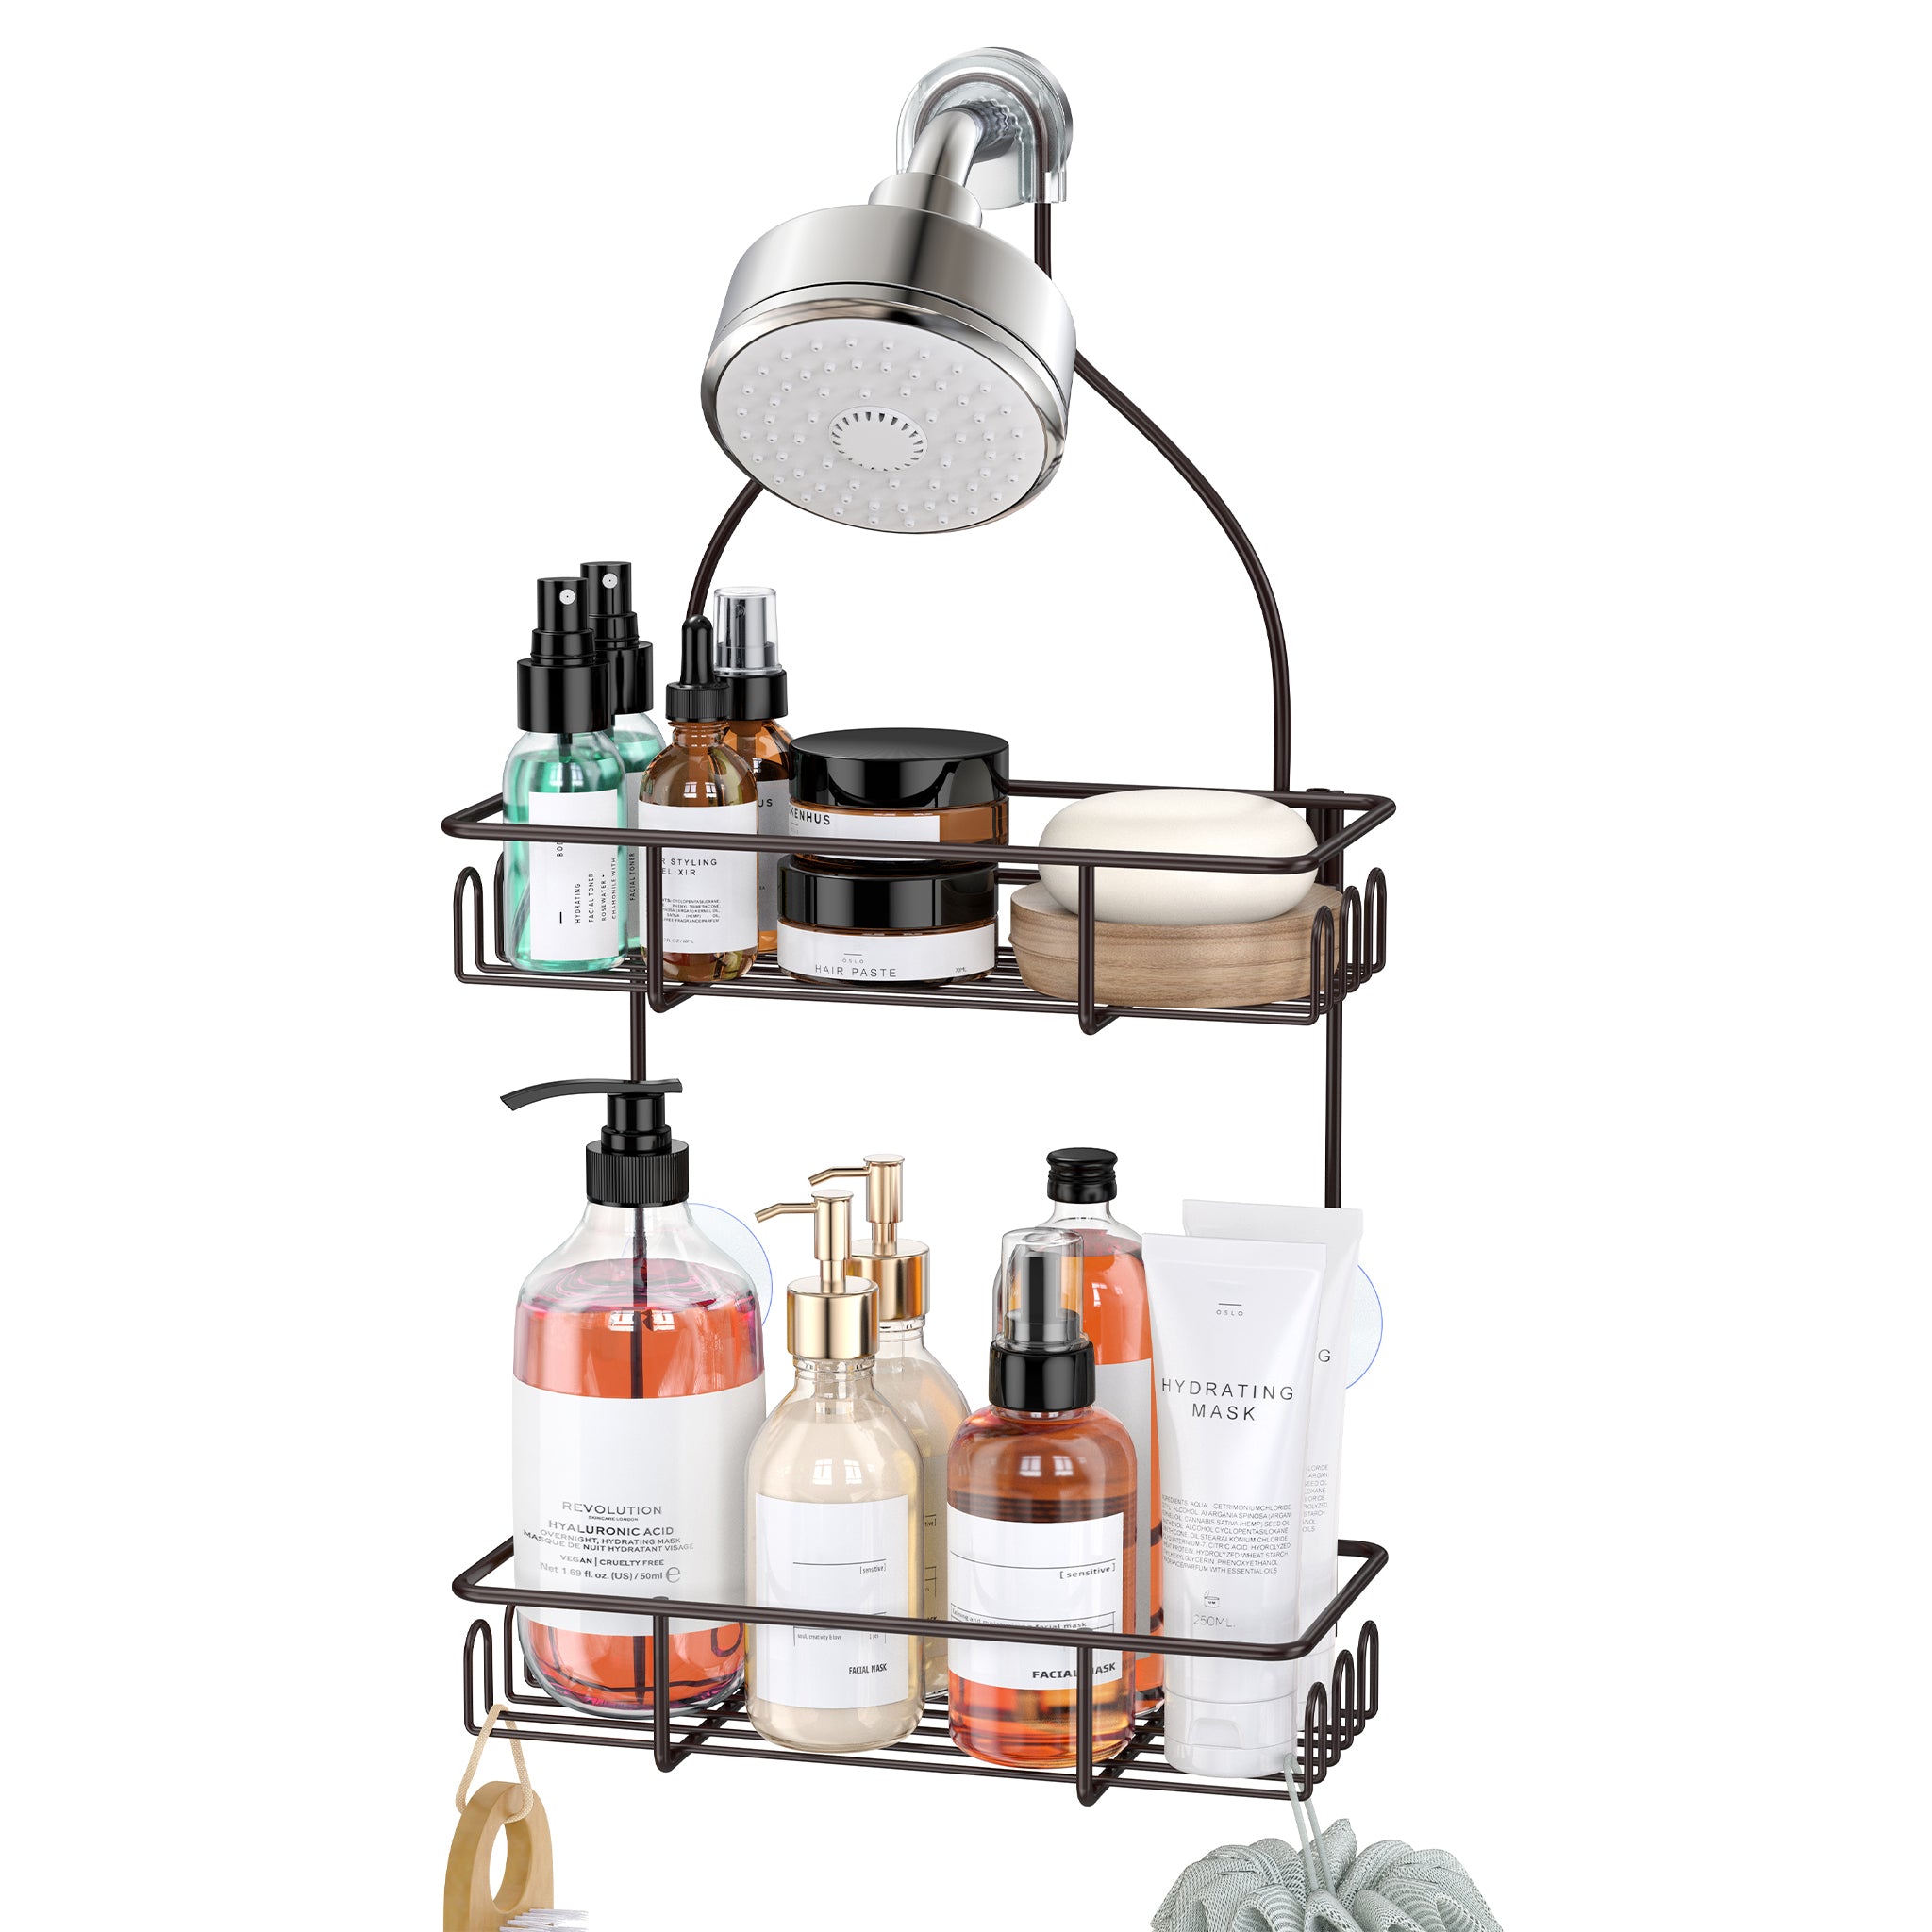 Rust-Resistant Tension Pole Shower Caddy, 3 Shelves, Oil Rubbed Bronze  Finish